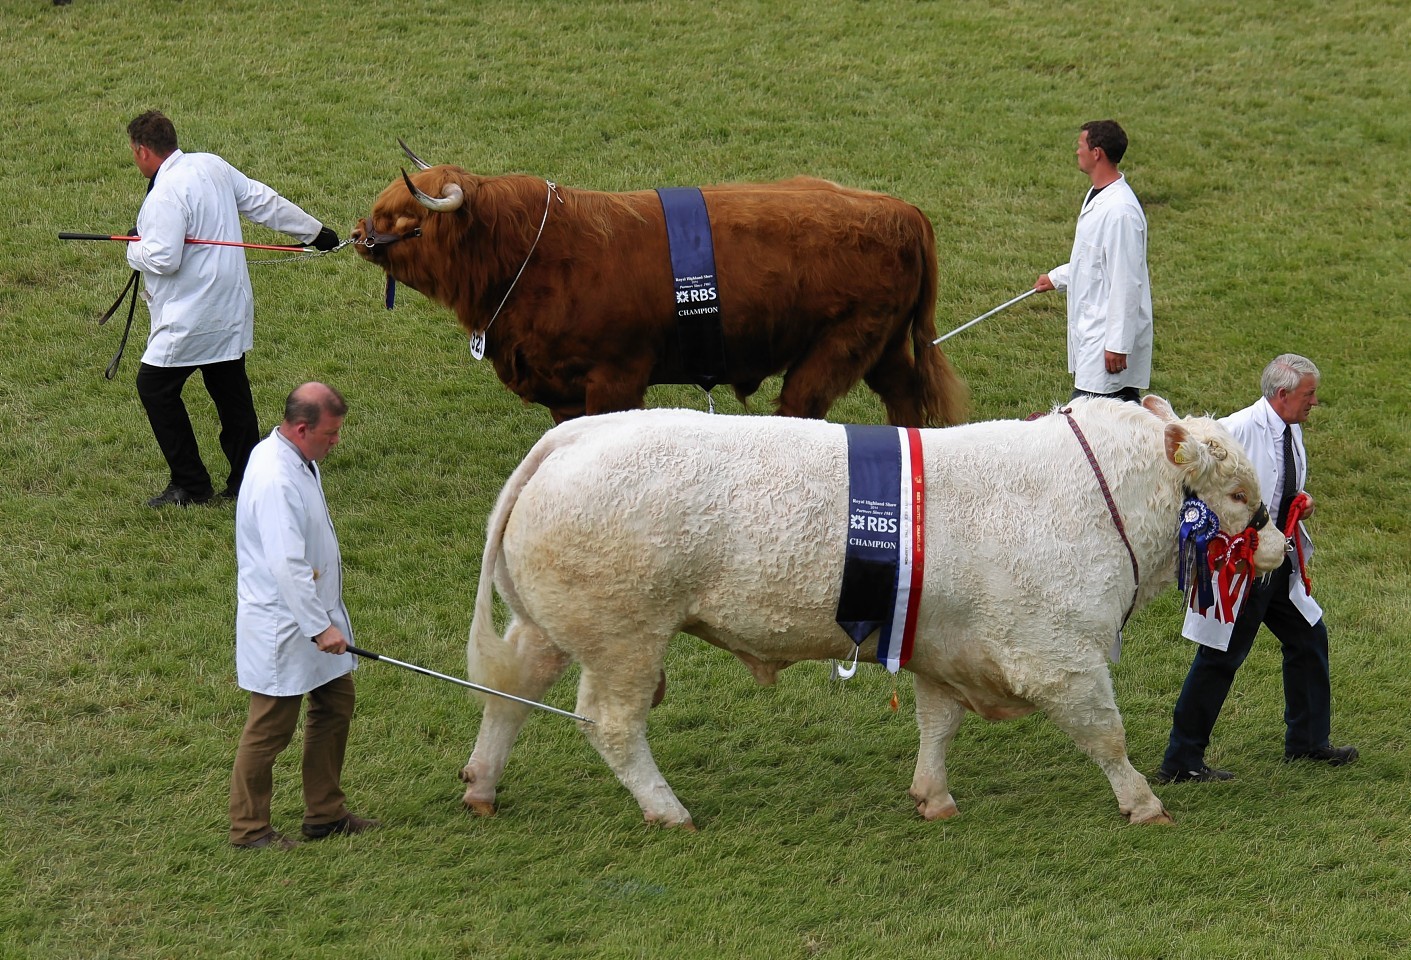 This year's Royal Highland Show